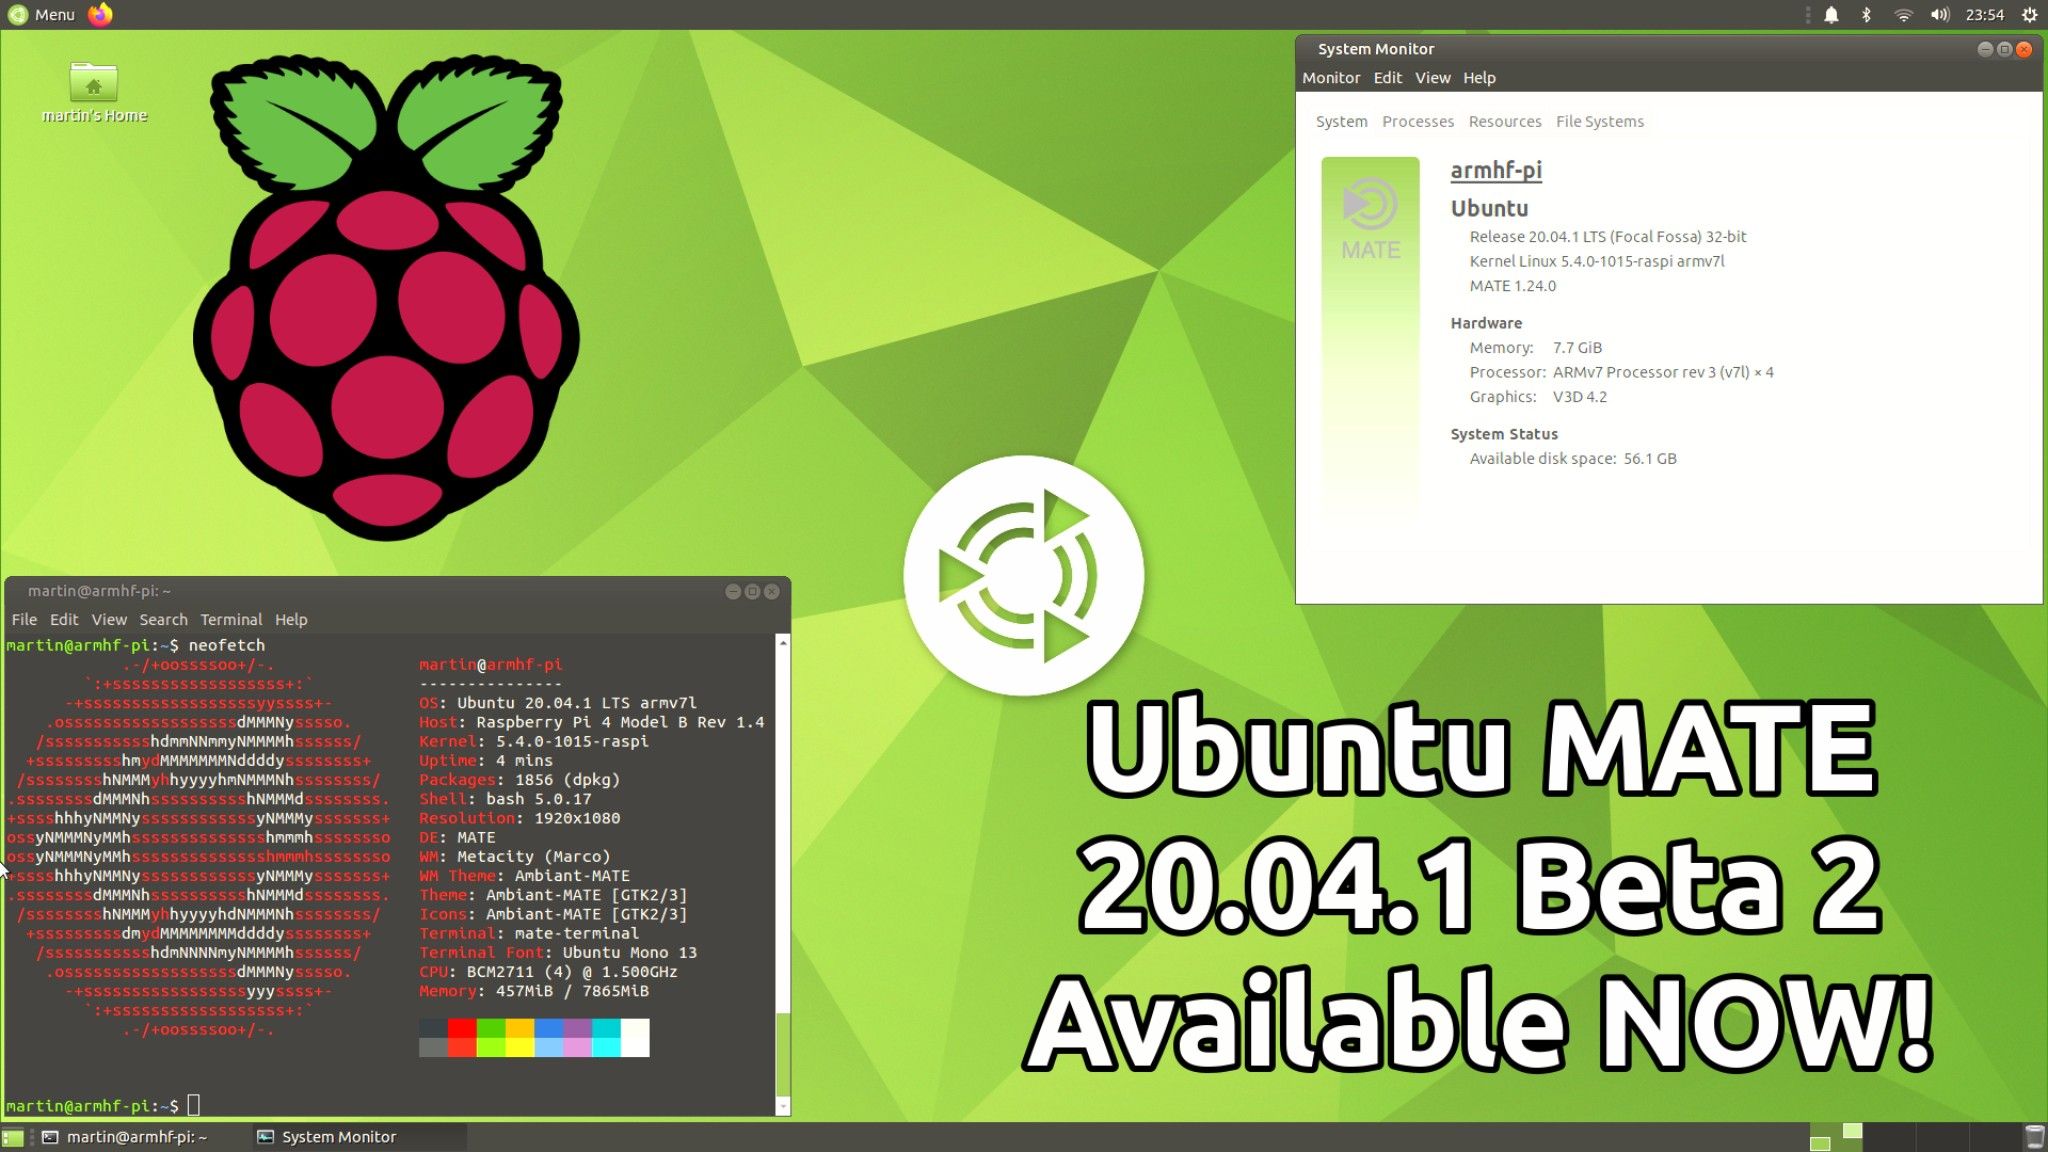 Ubuntu MATE 20.04.1 for Raspberry Pi Now Has a Second Beta Ready for Testing